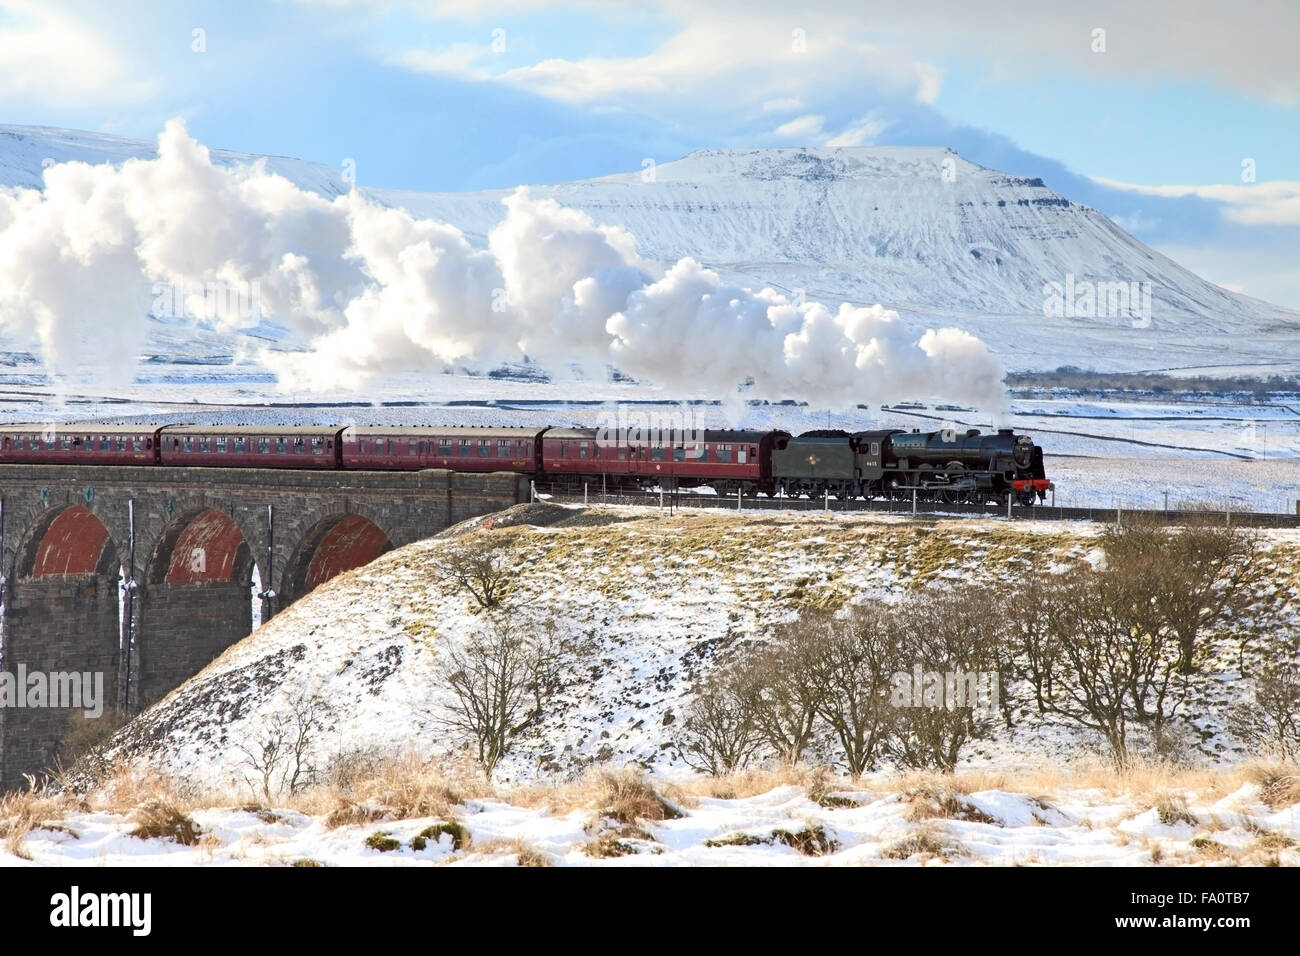 46115 Scots Guardsman passing over Ribblehead Viaduct with a snowy Ingleborough in the background, North Yorkshire Stock Photo